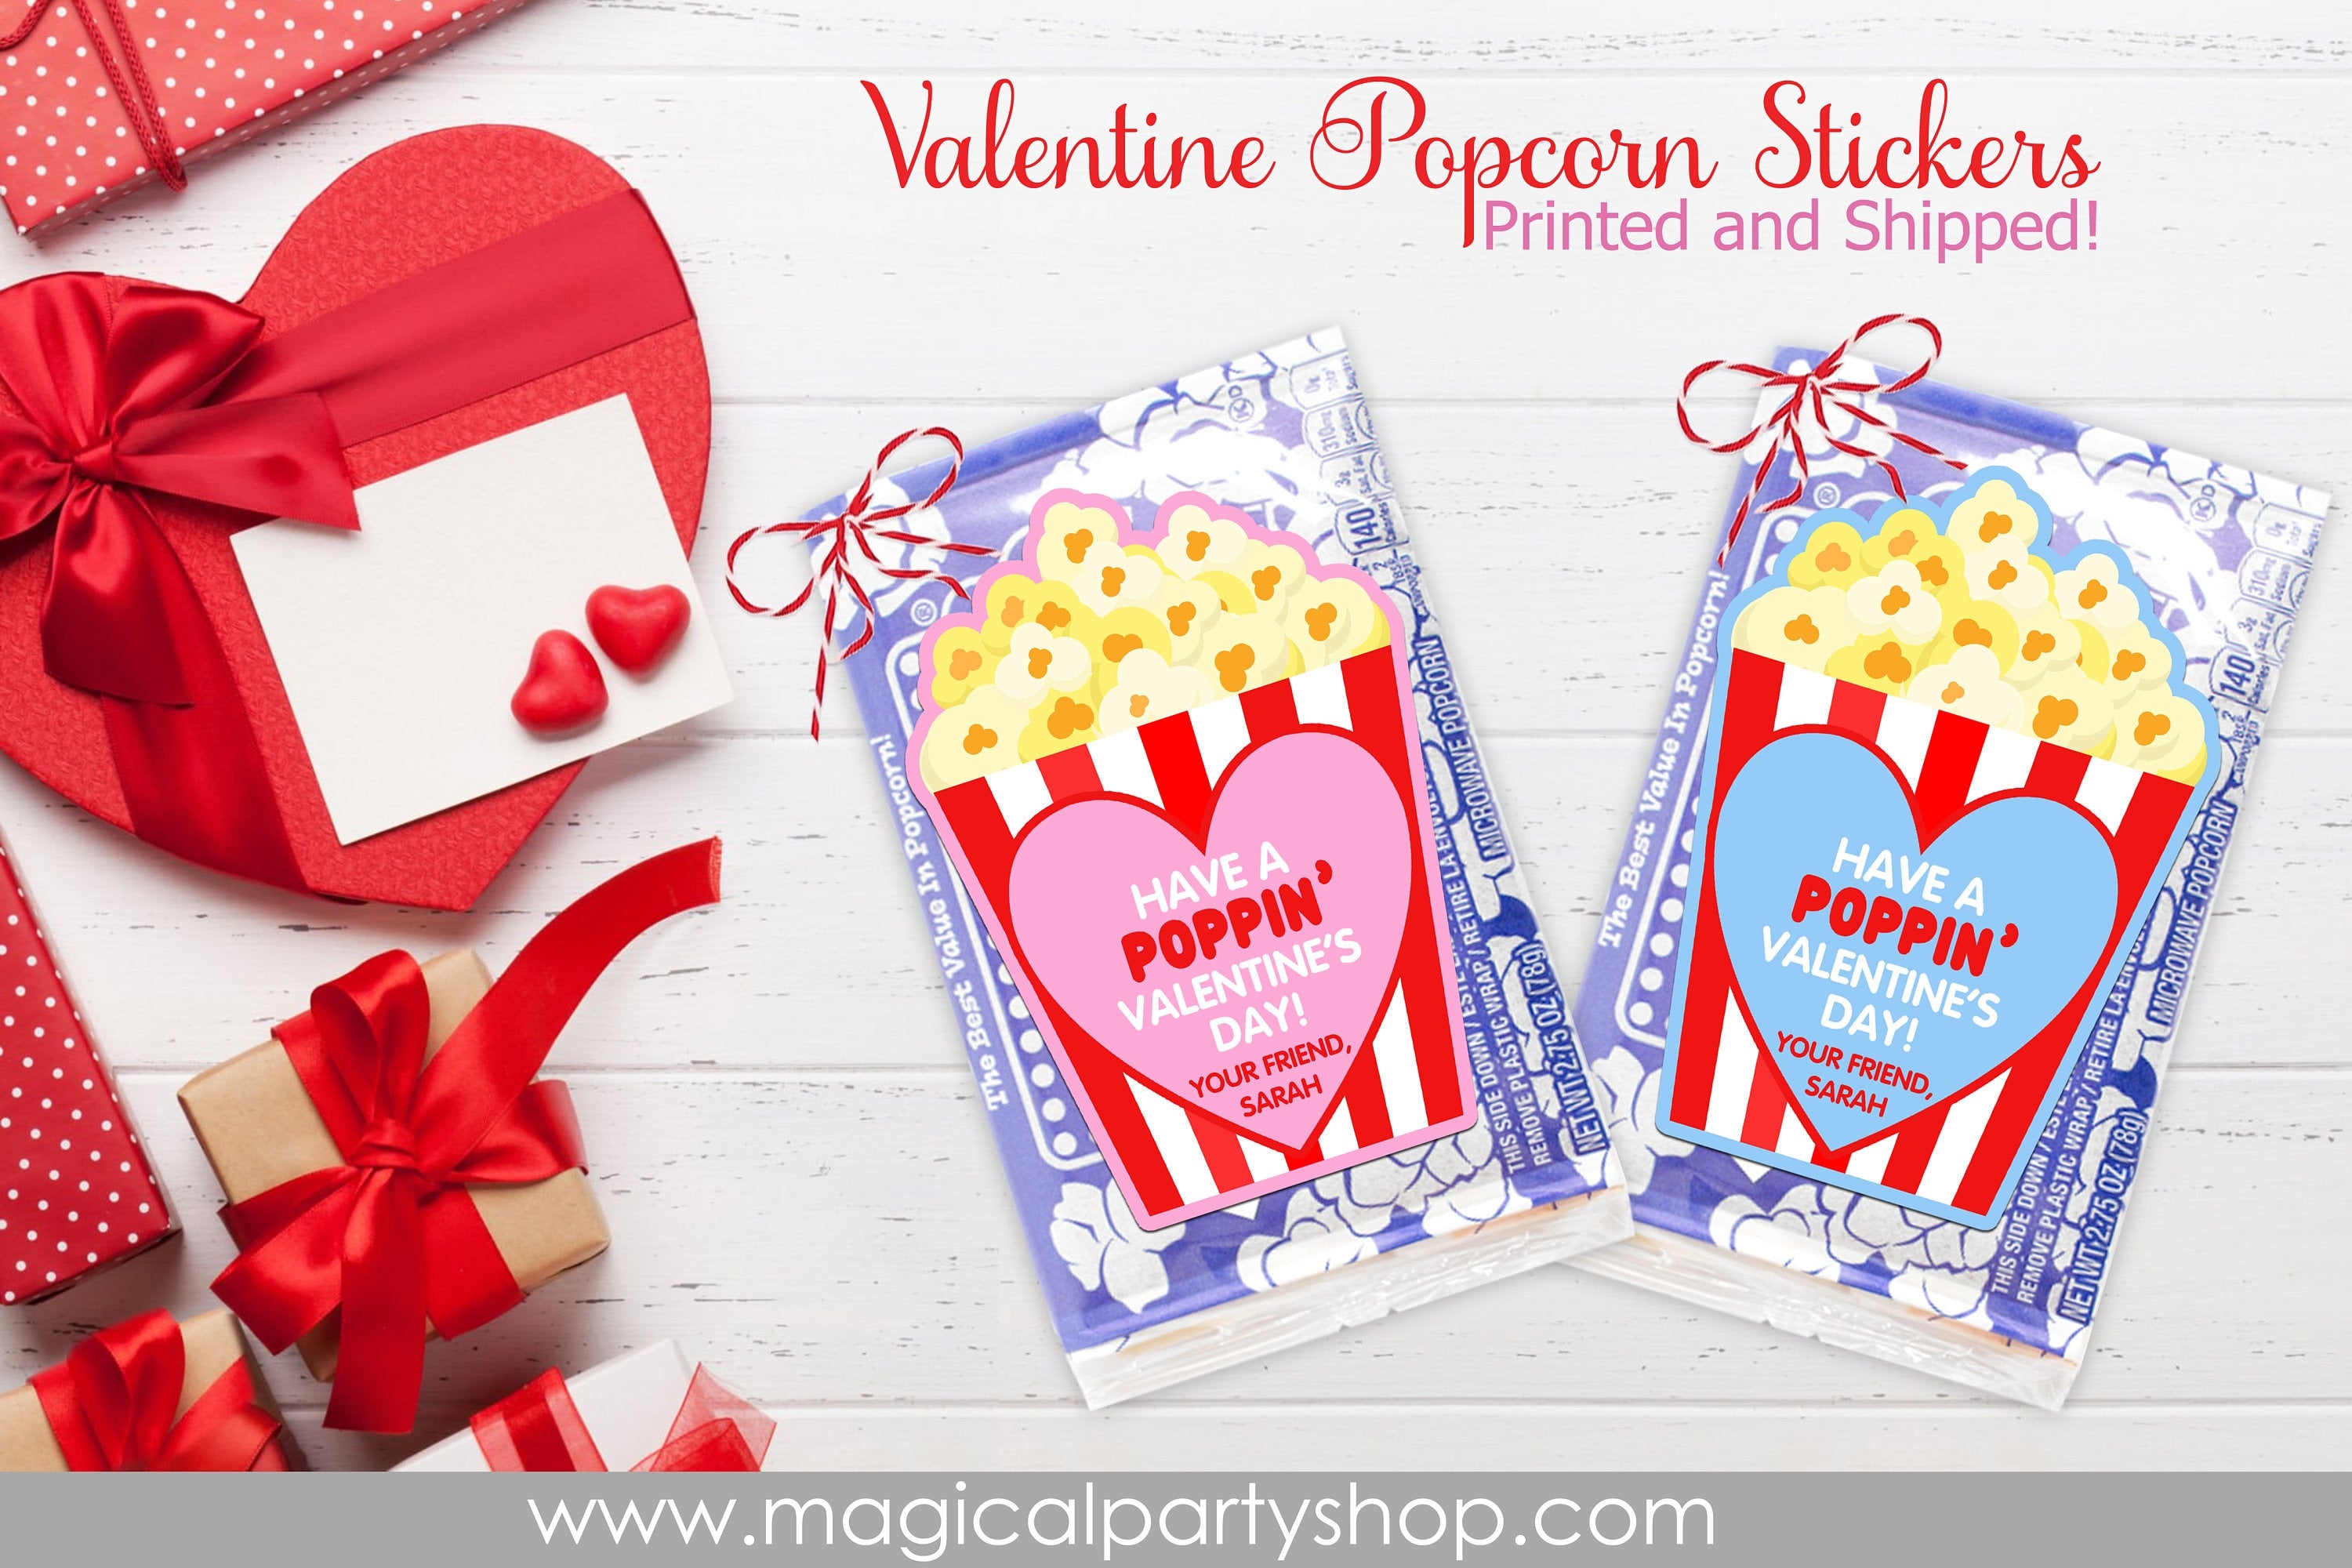 Valentines Day Popcorn Stickers | Valentine's Day Party Stickers | Boy Girl Kids Classroom Party Labels | Poppin' Valentines Stickers